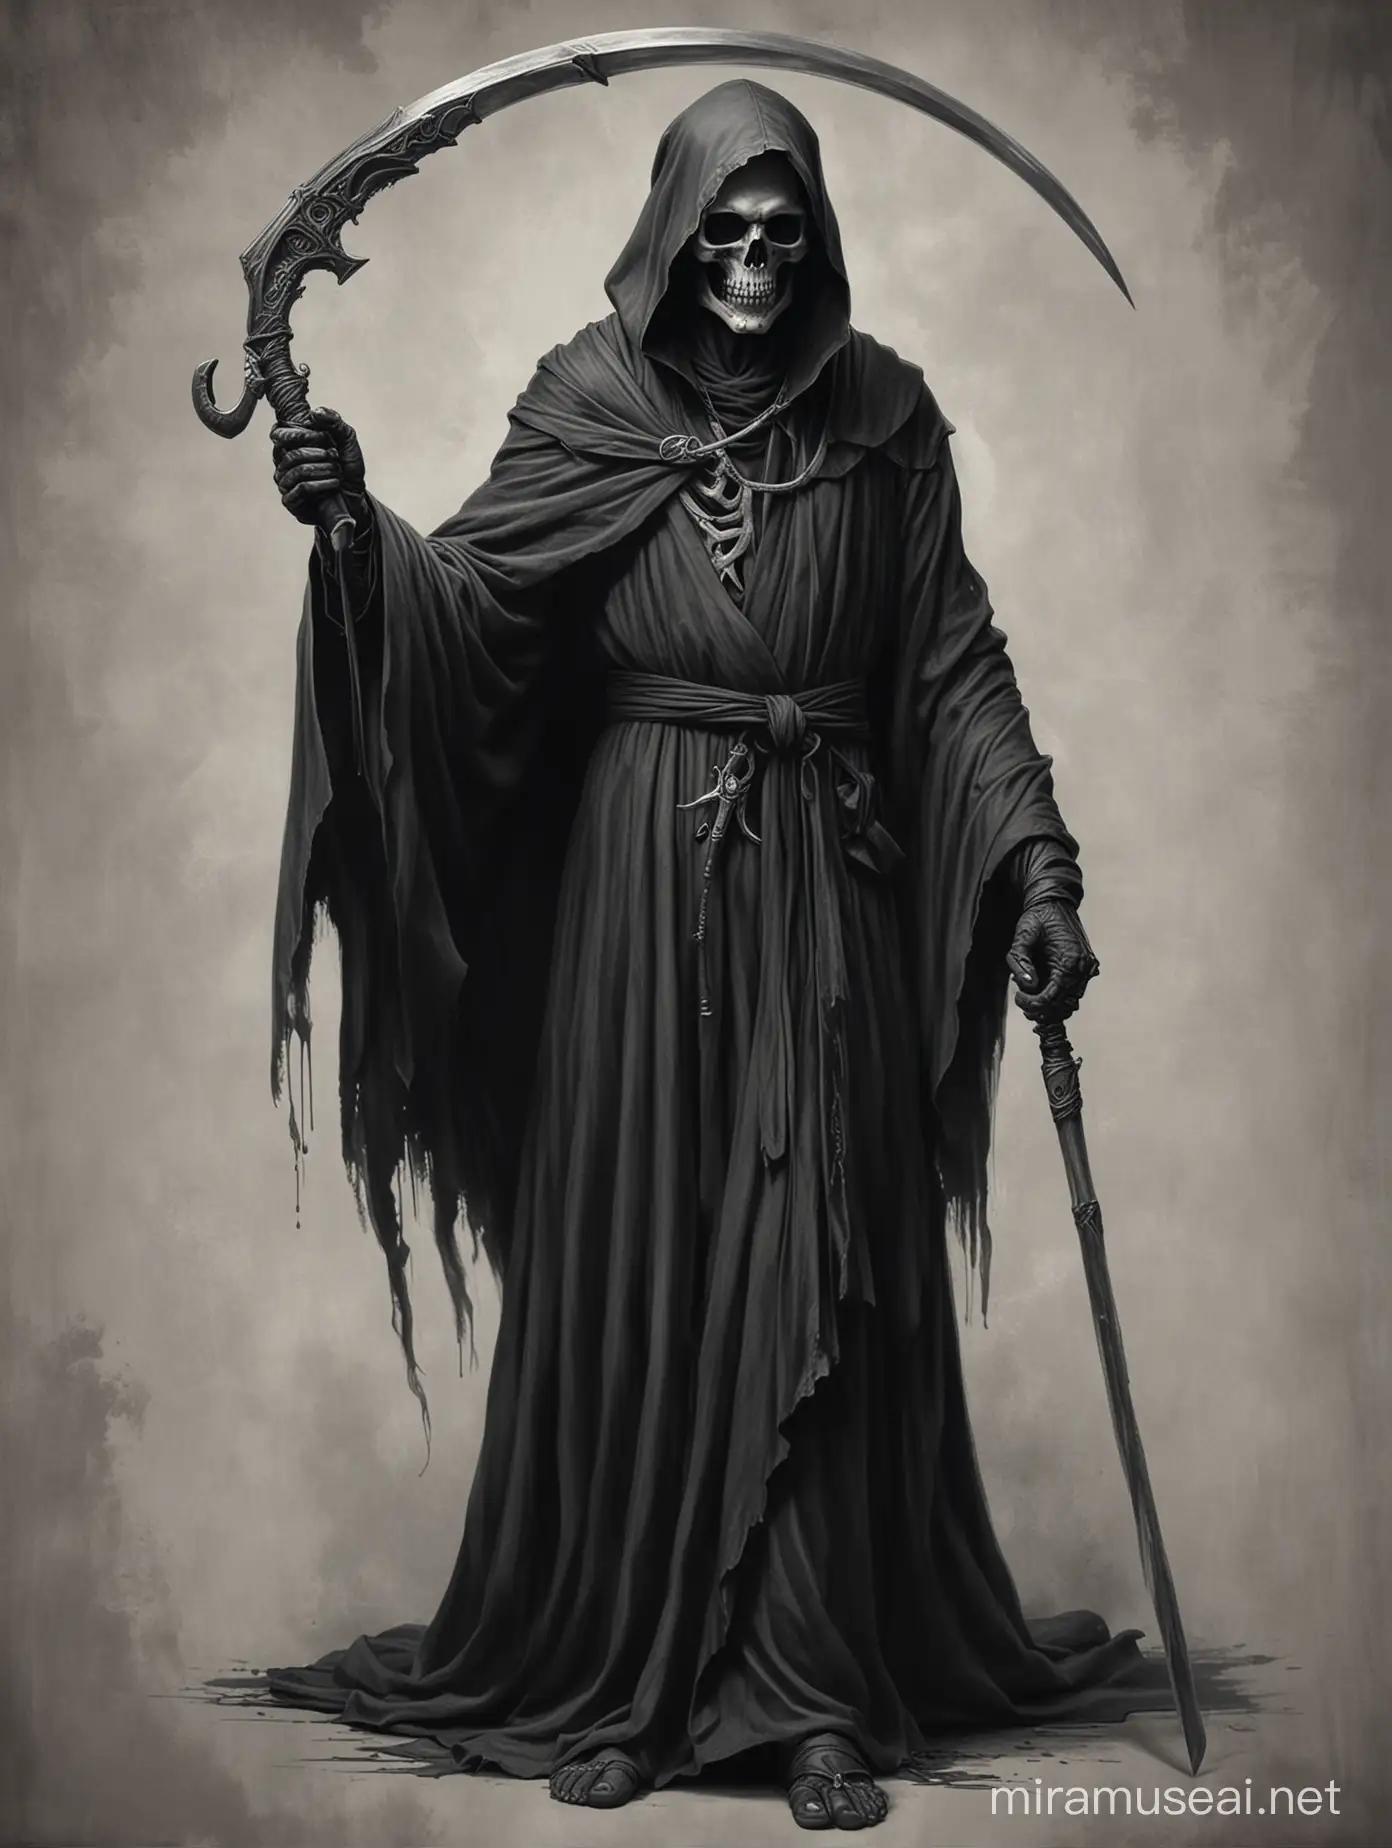 Black and grey realism drawing of Grim reaper holding a scythe in one hand and a scroll in the other hand wearing a full body black robe simplified